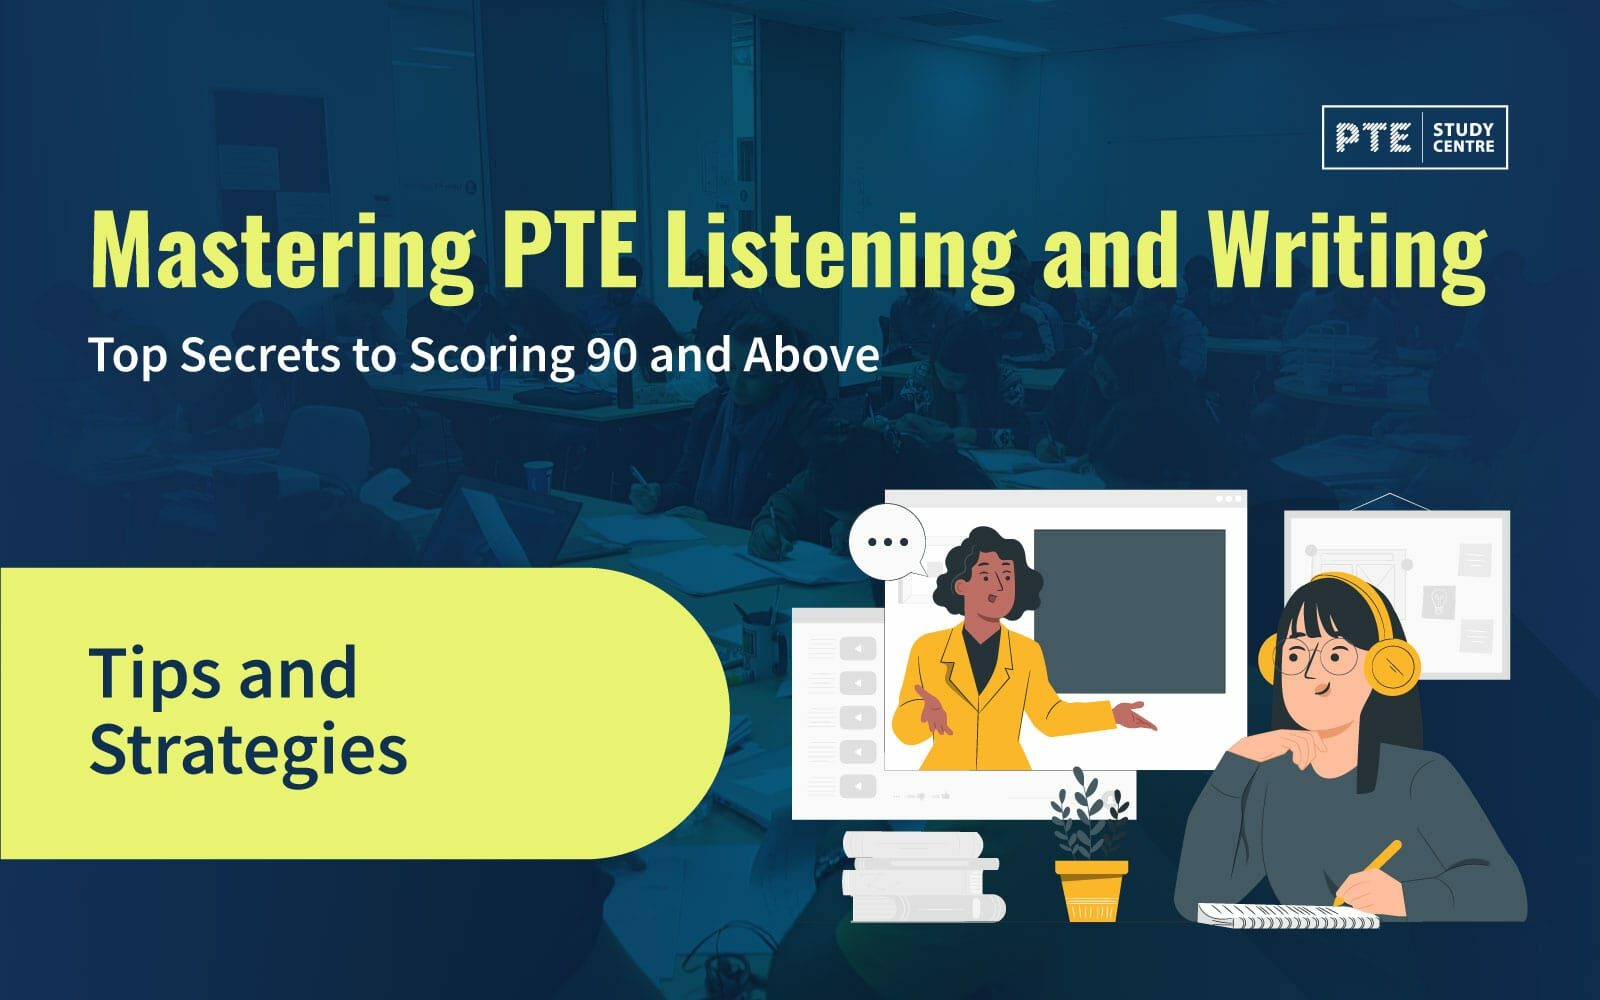 Mastering PTE Listening and Writing: Top Secrets to Scoring 90 and Above